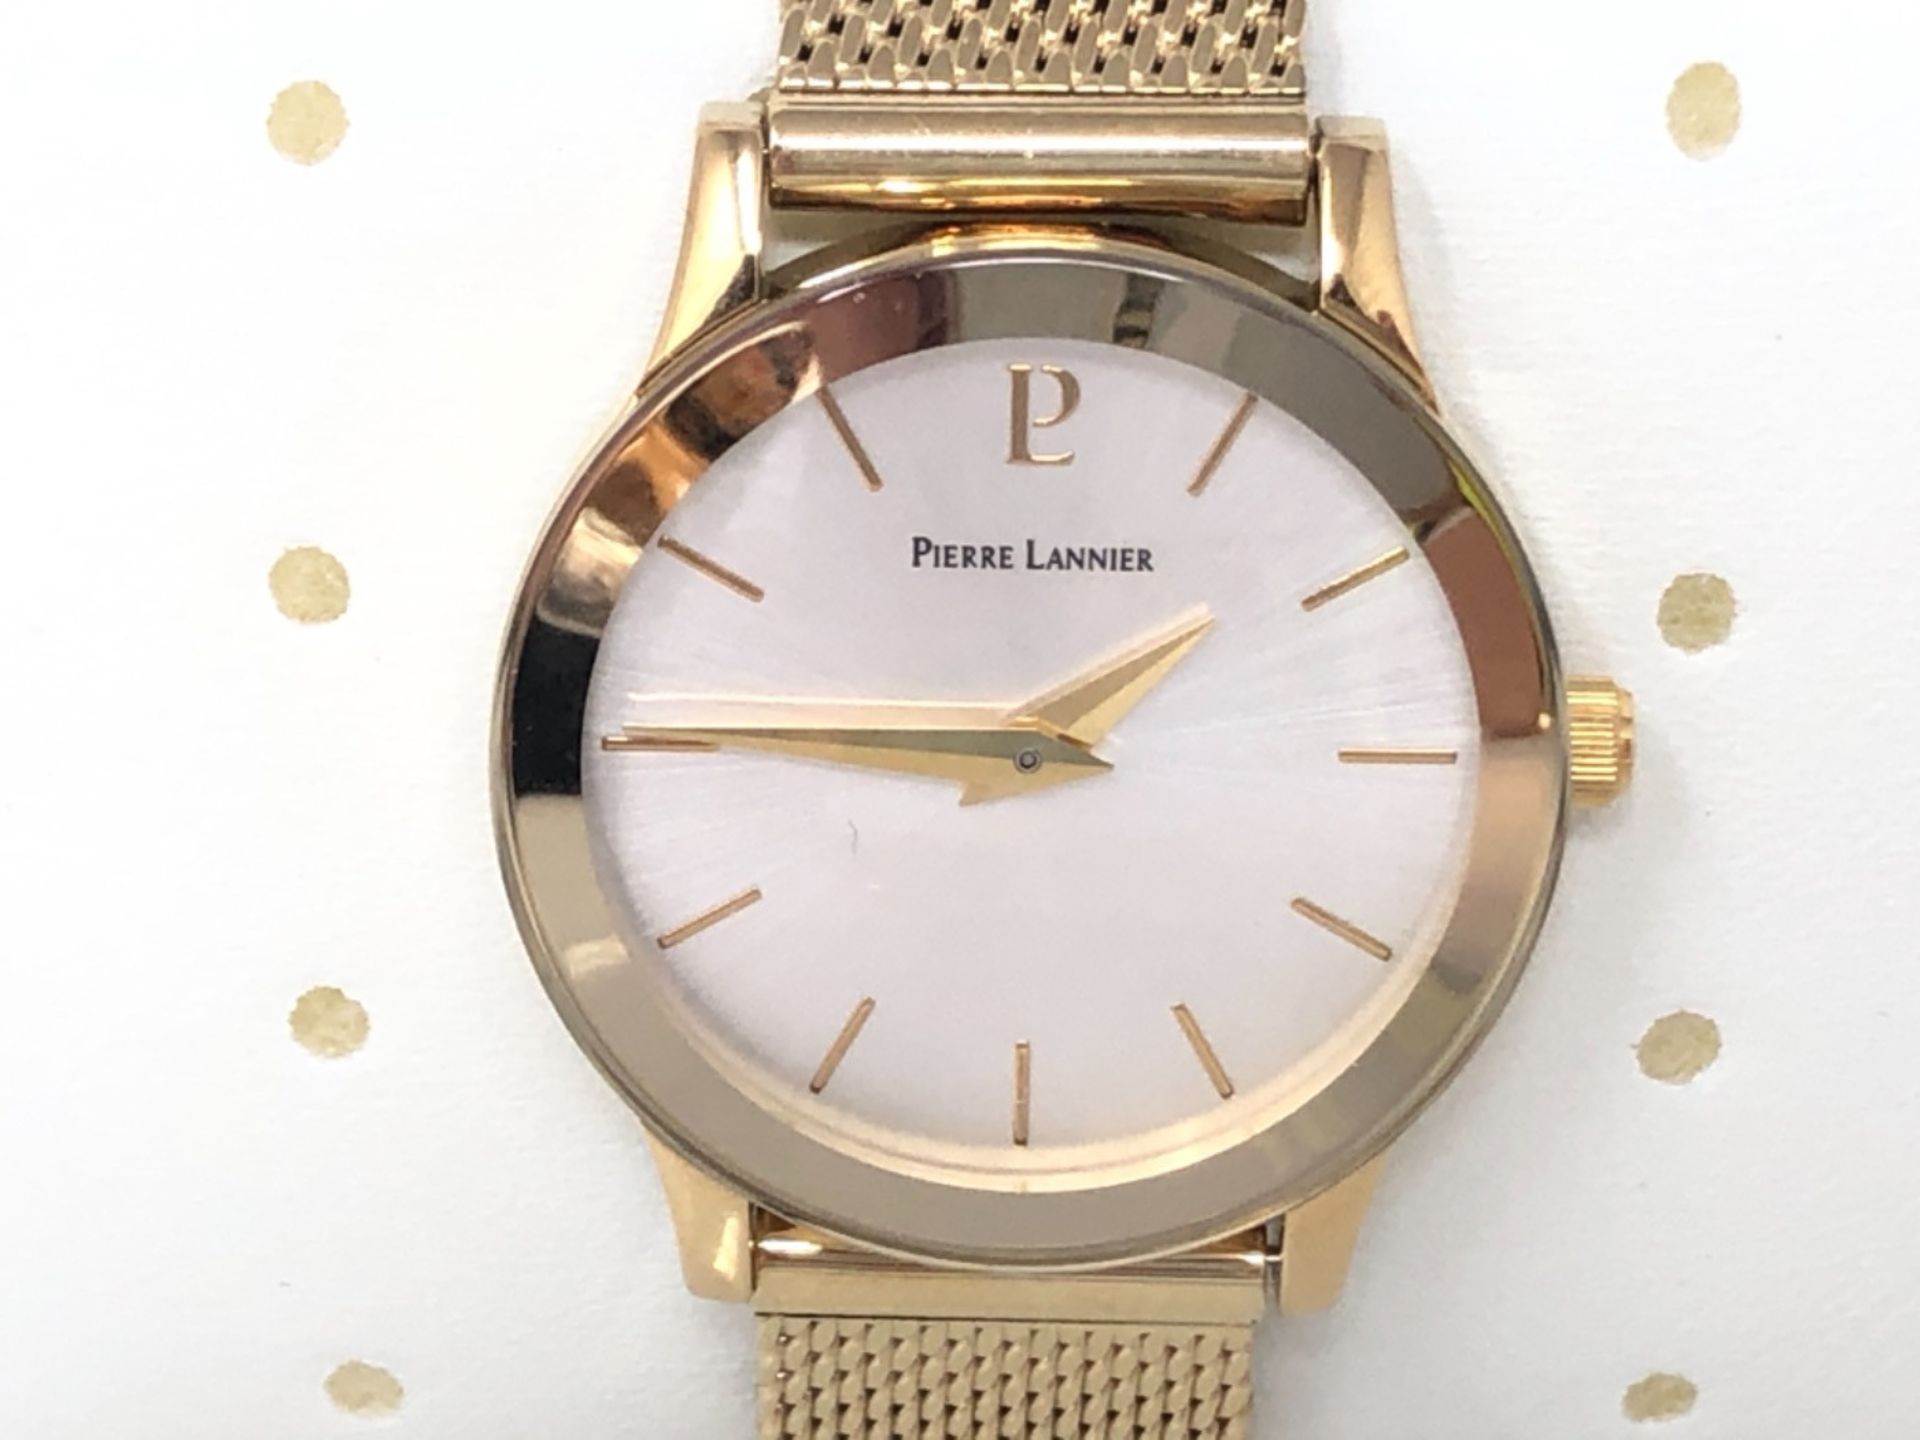 RRP £87.00 Pierre Lannier Women's Analogue Quartz Watch with Solid Stainless Steel Bracelet 051H5 - Image 3 of 3